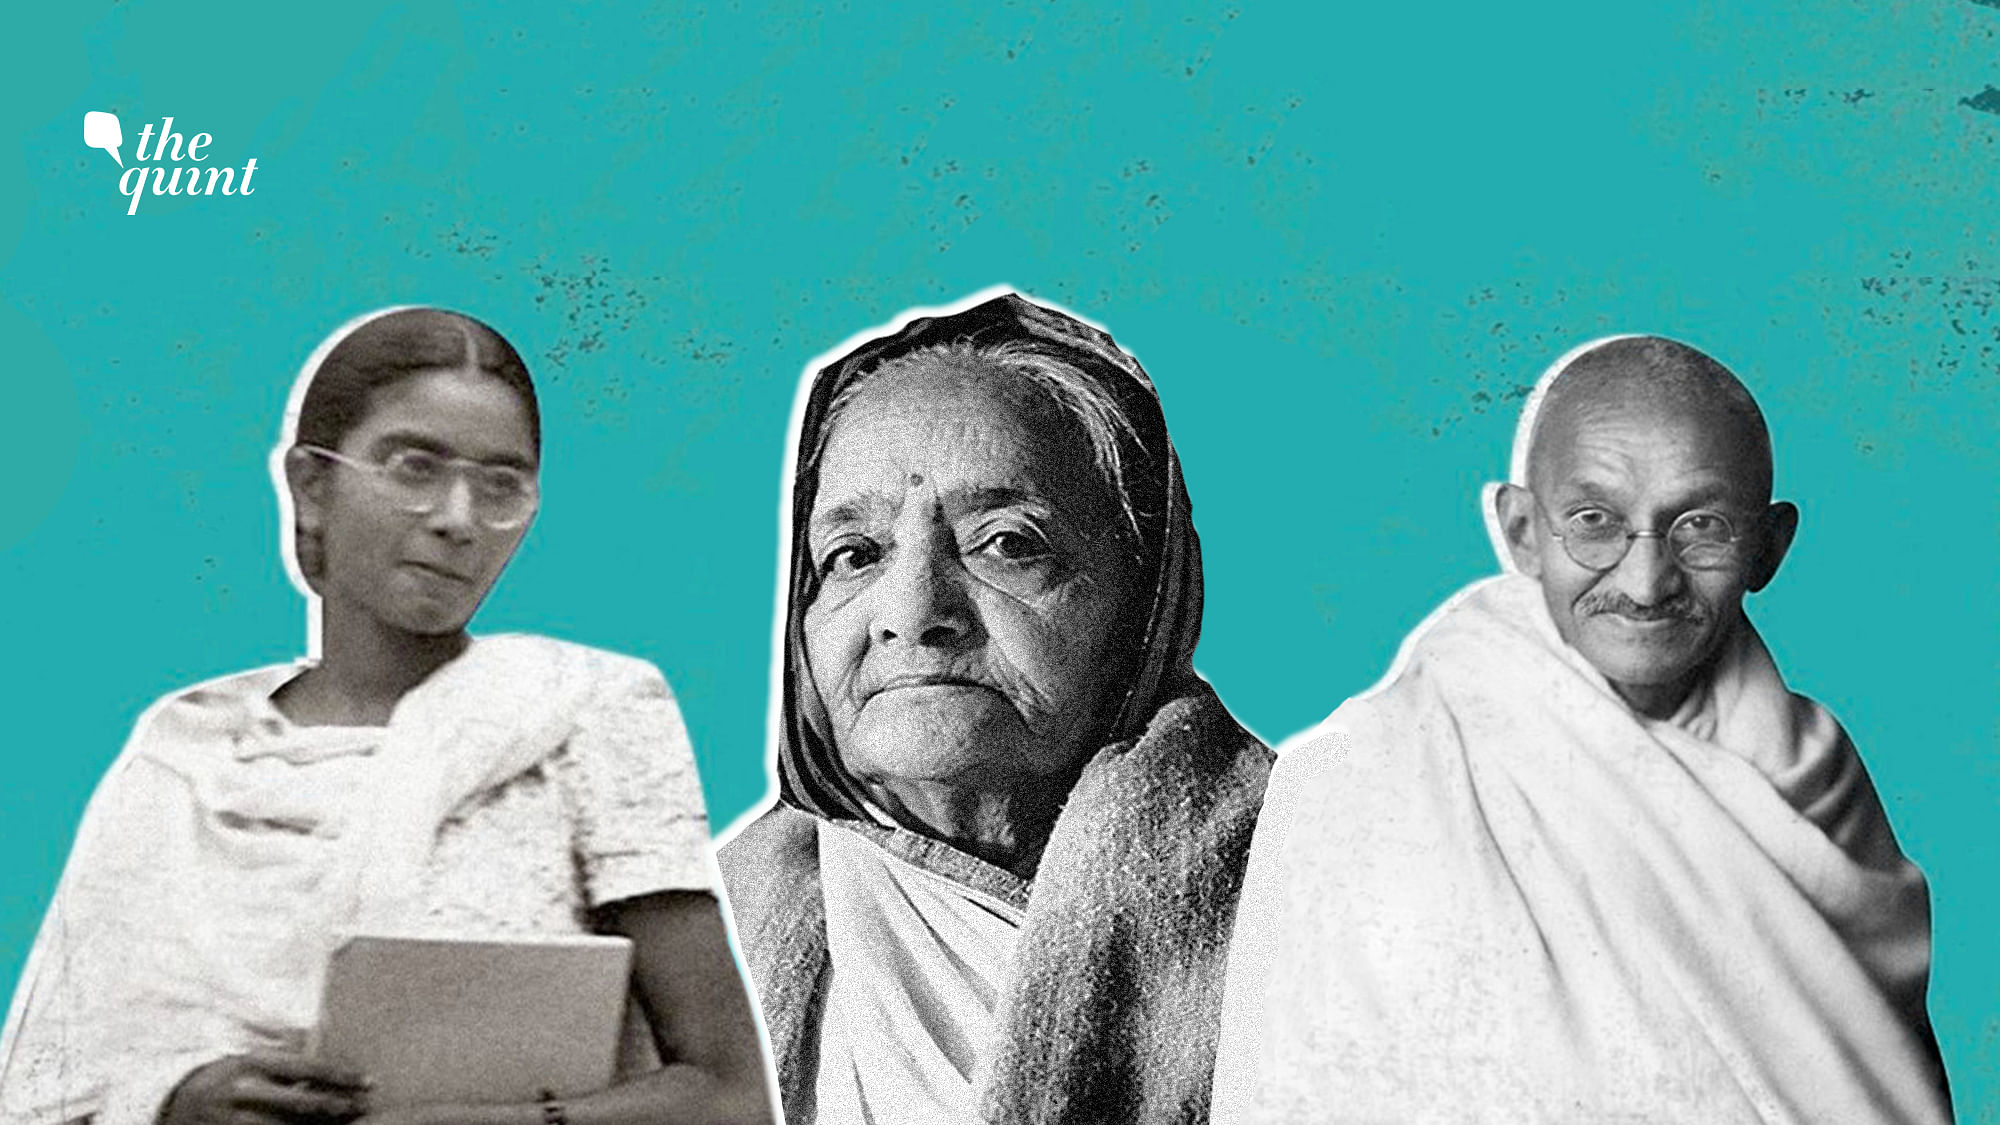 Through her diaries, we see another Manu Gandhi. Not just Gandhi’s grand-niece, but a witty chronicler of history.